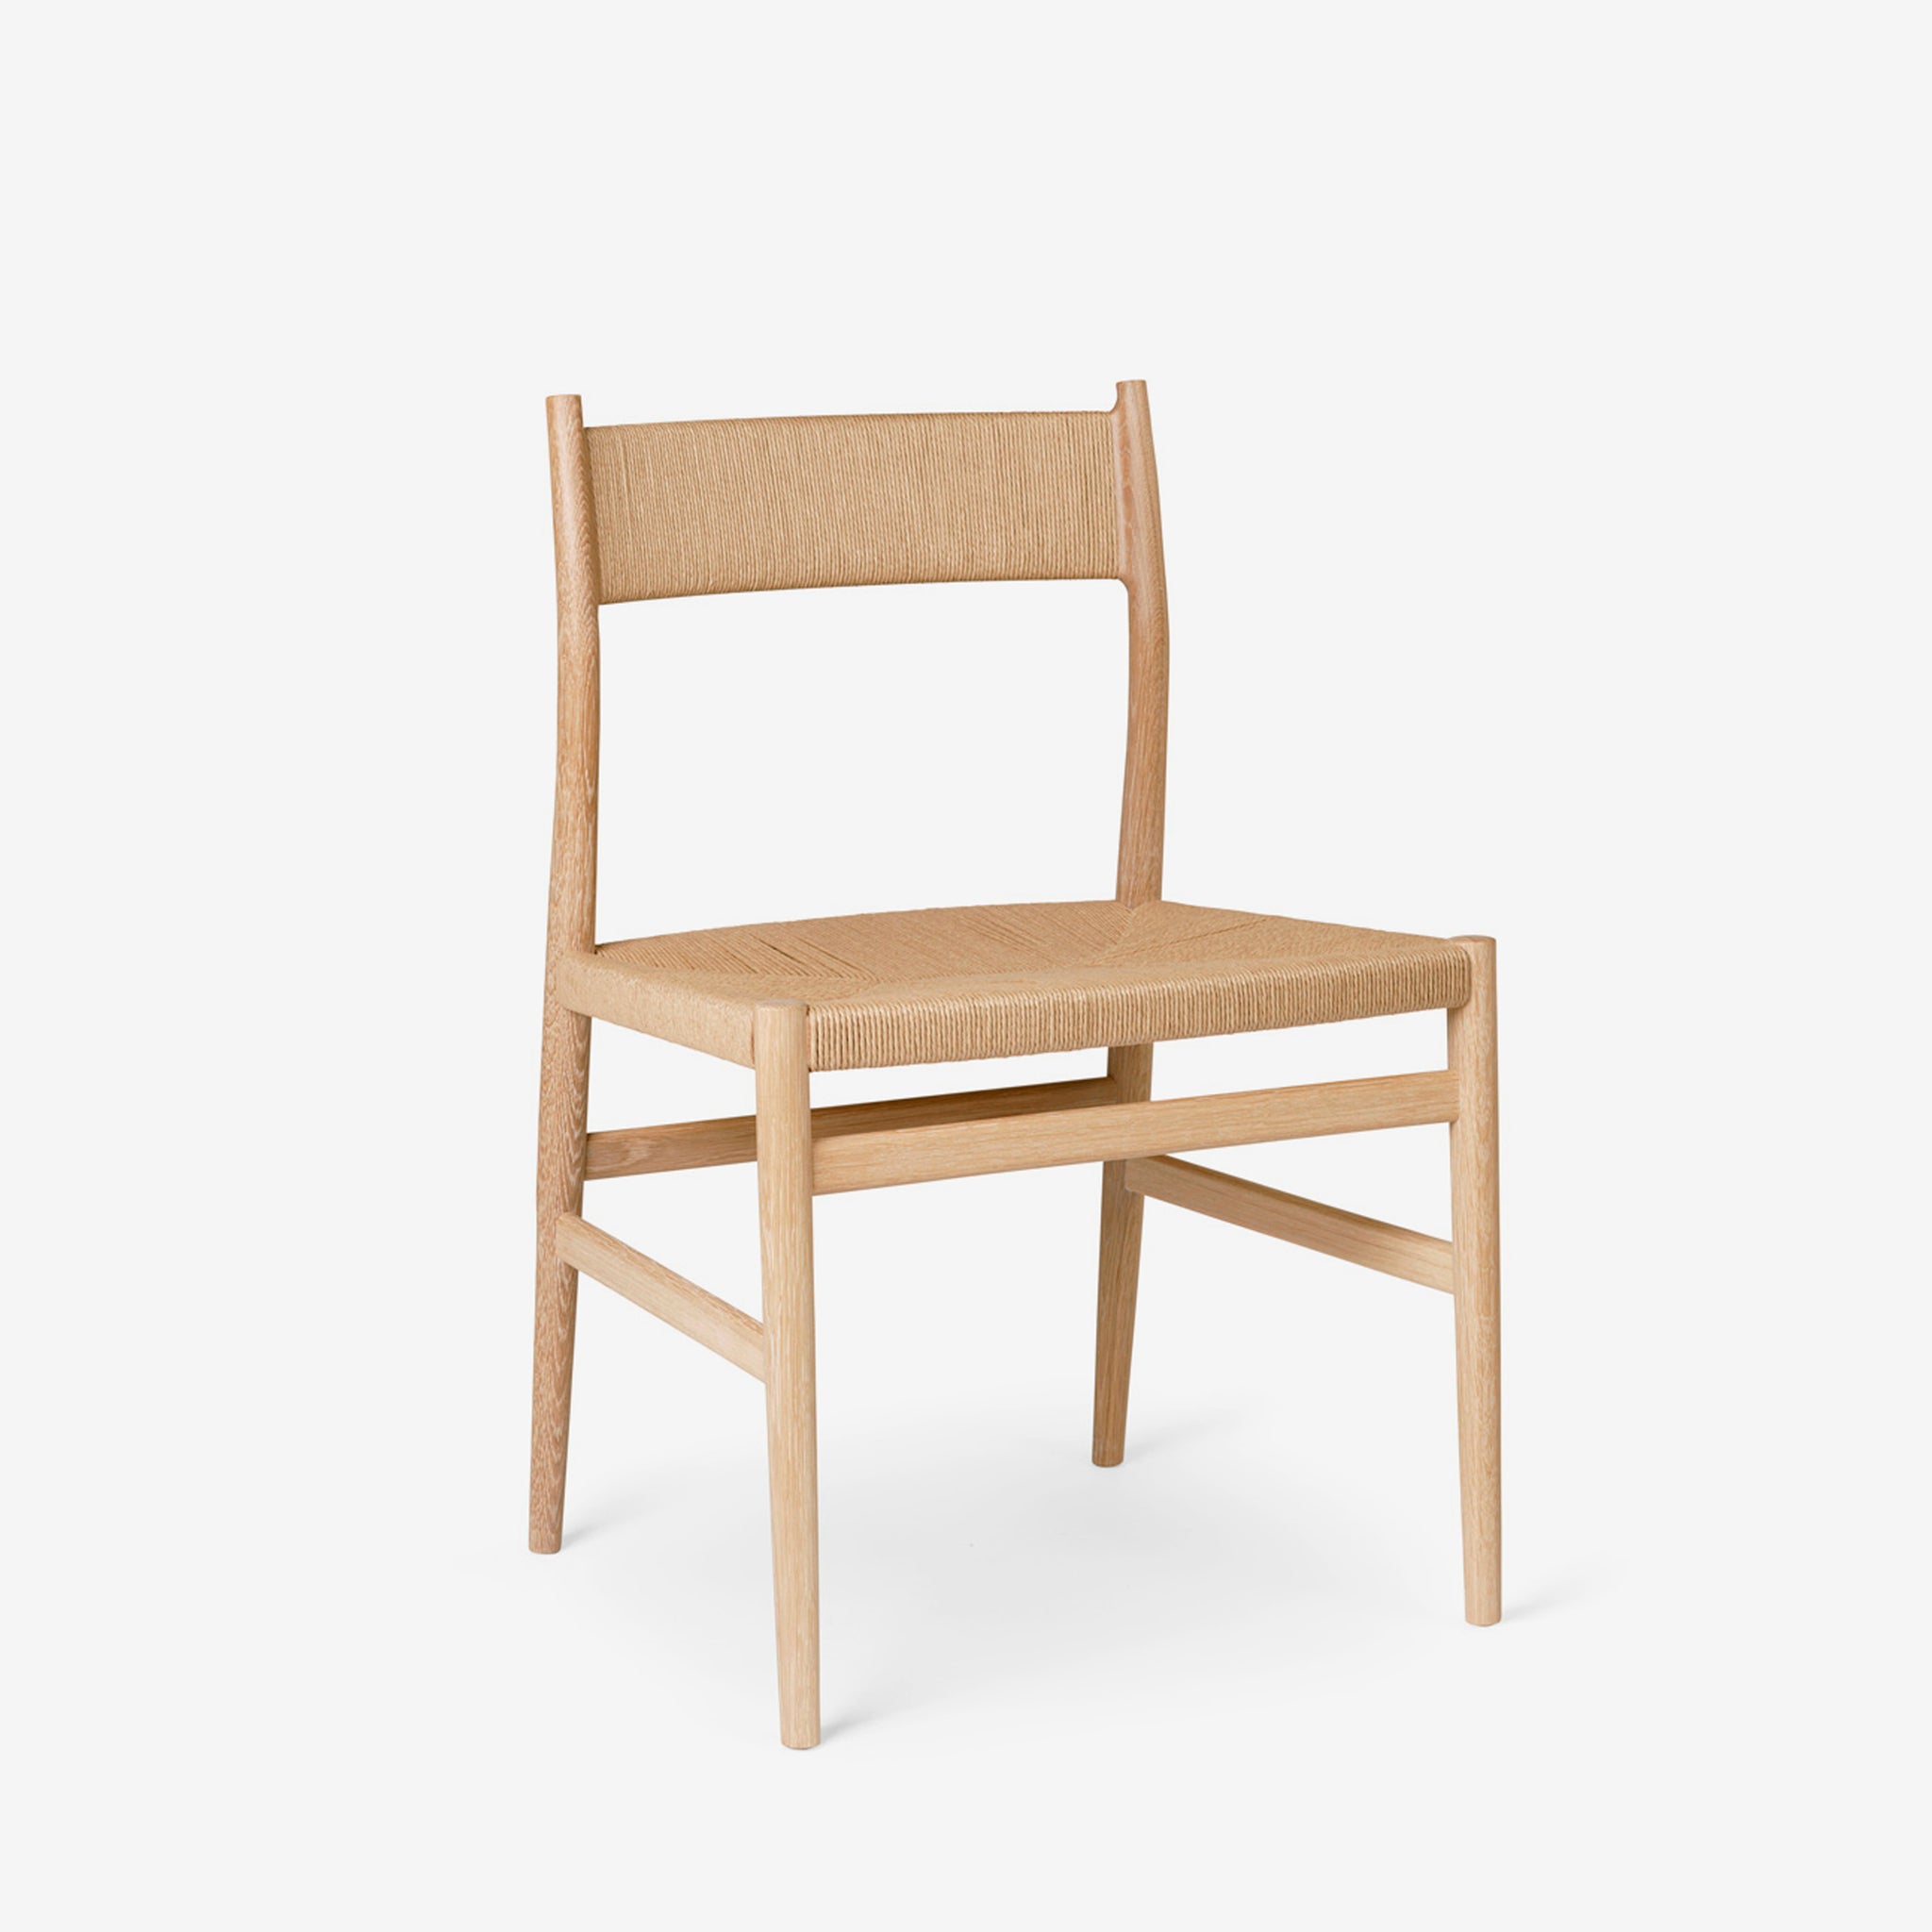 ARV Dining Chair - Papercord Back